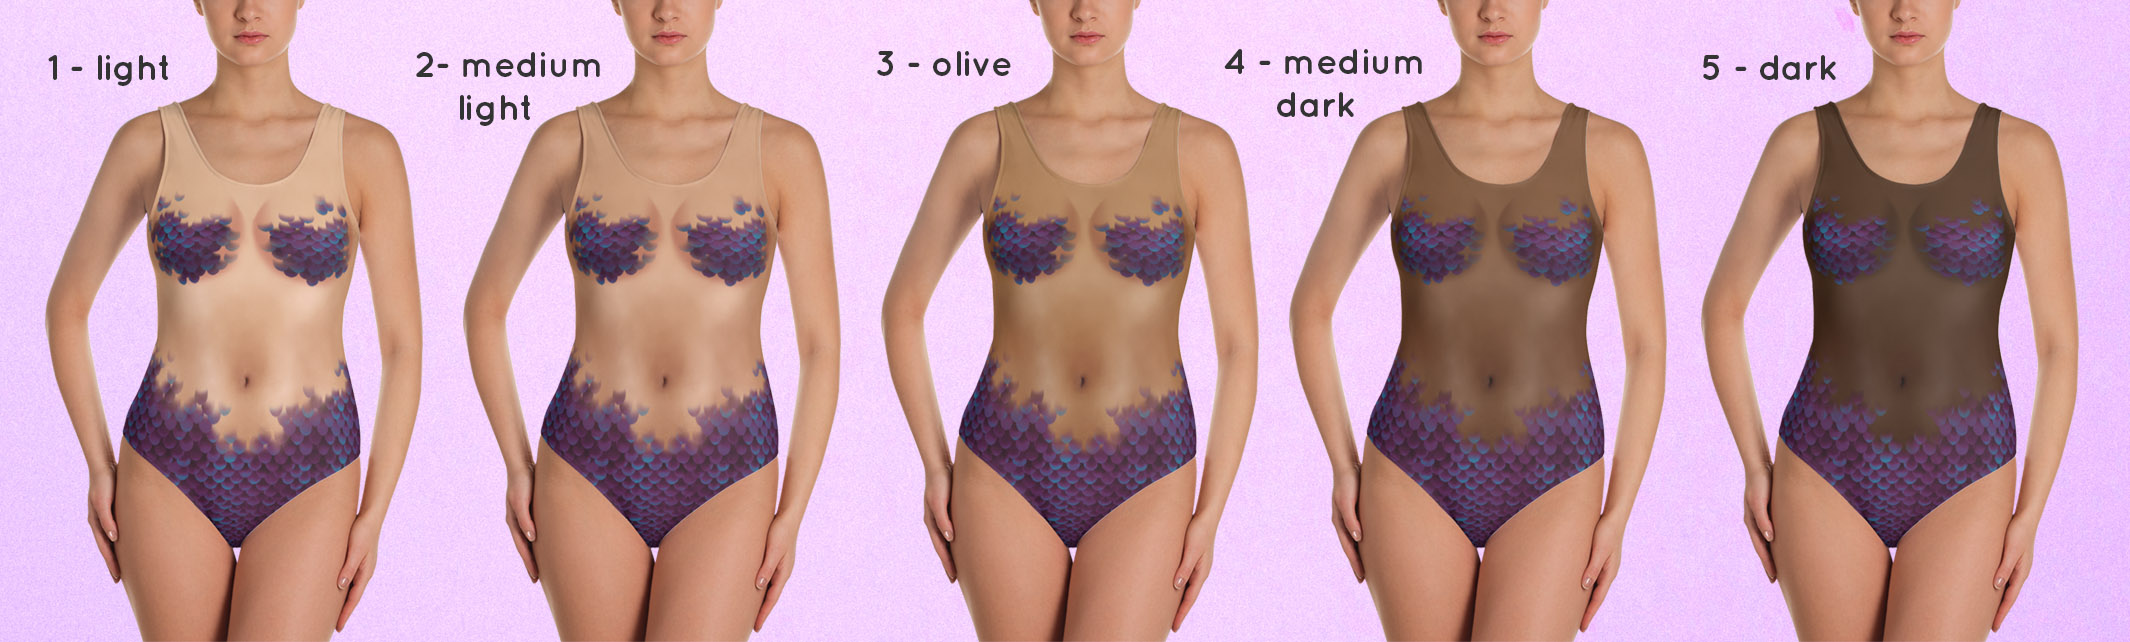 Mermaid Scale Swimsuits